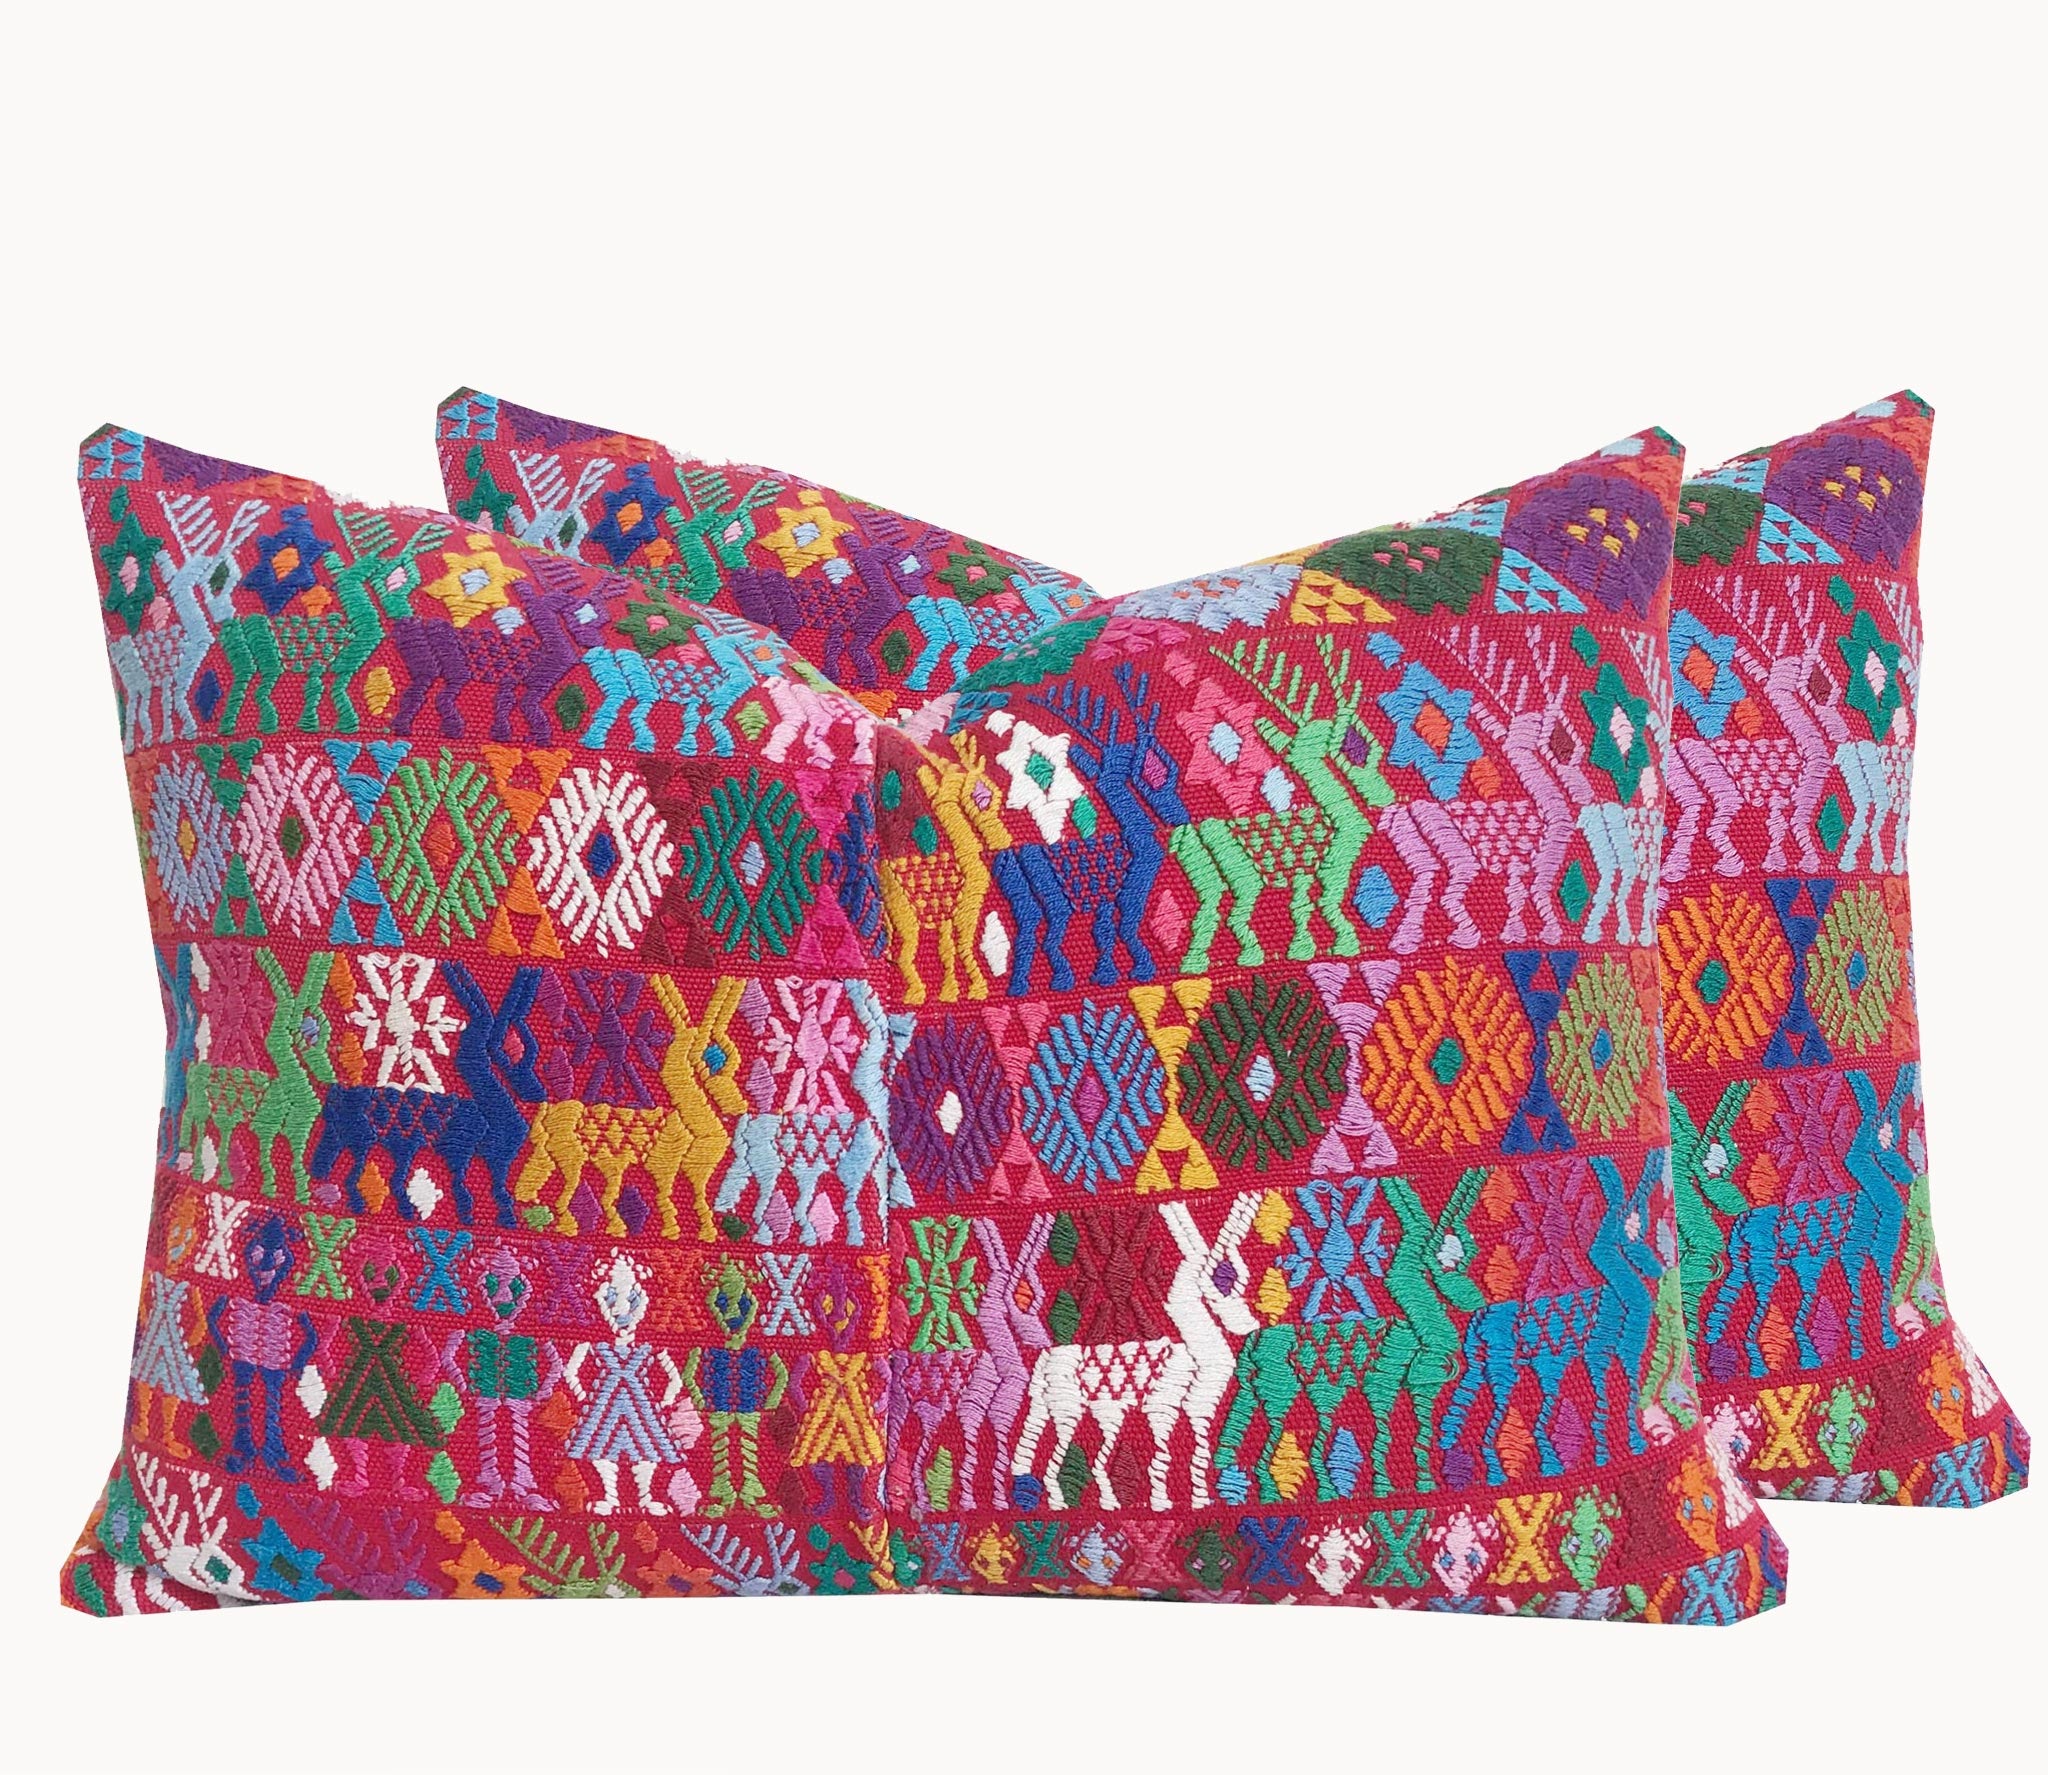 Guatemalan Huipil Pillow, vintage, hand embroidered Coban textile of brightly coloured tribal figures over a red cotton